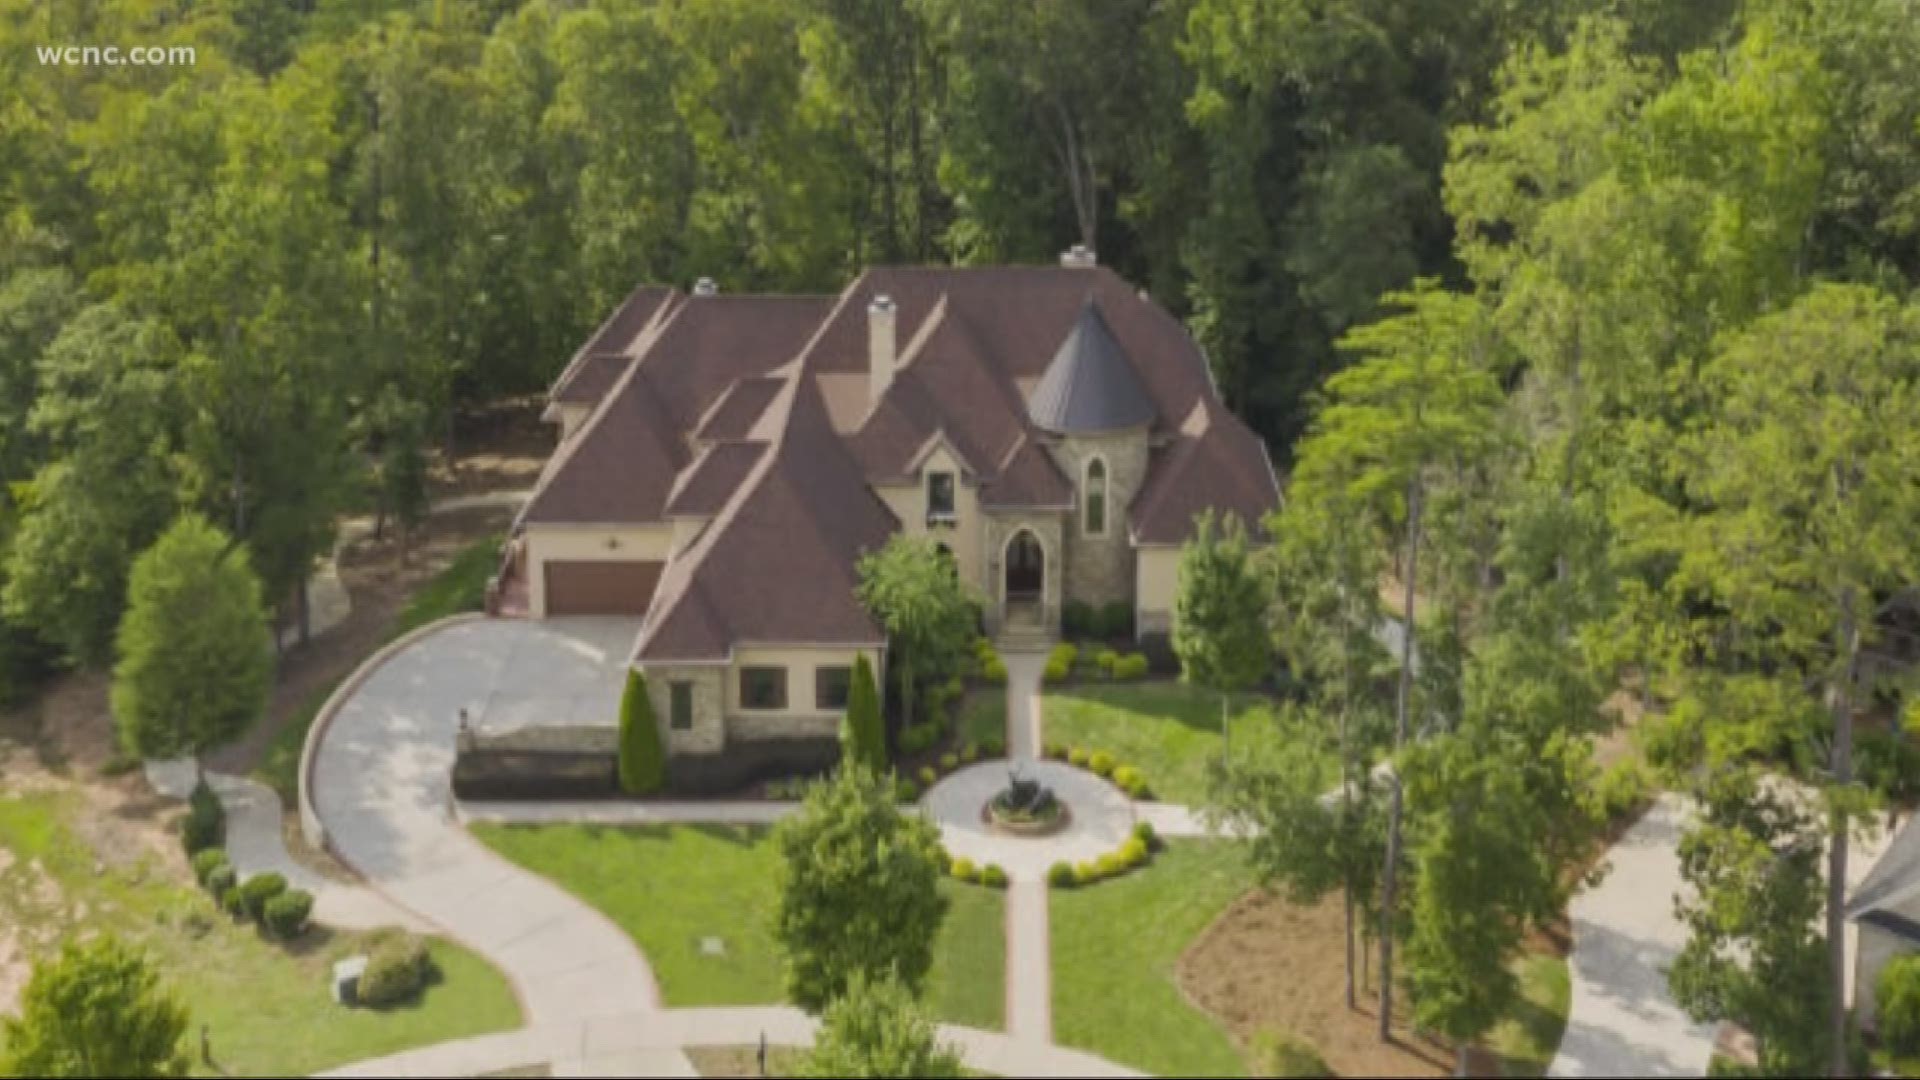 Just in time for Christmas, this Fort Mill mansion could be yours for a cool $2.5 million.